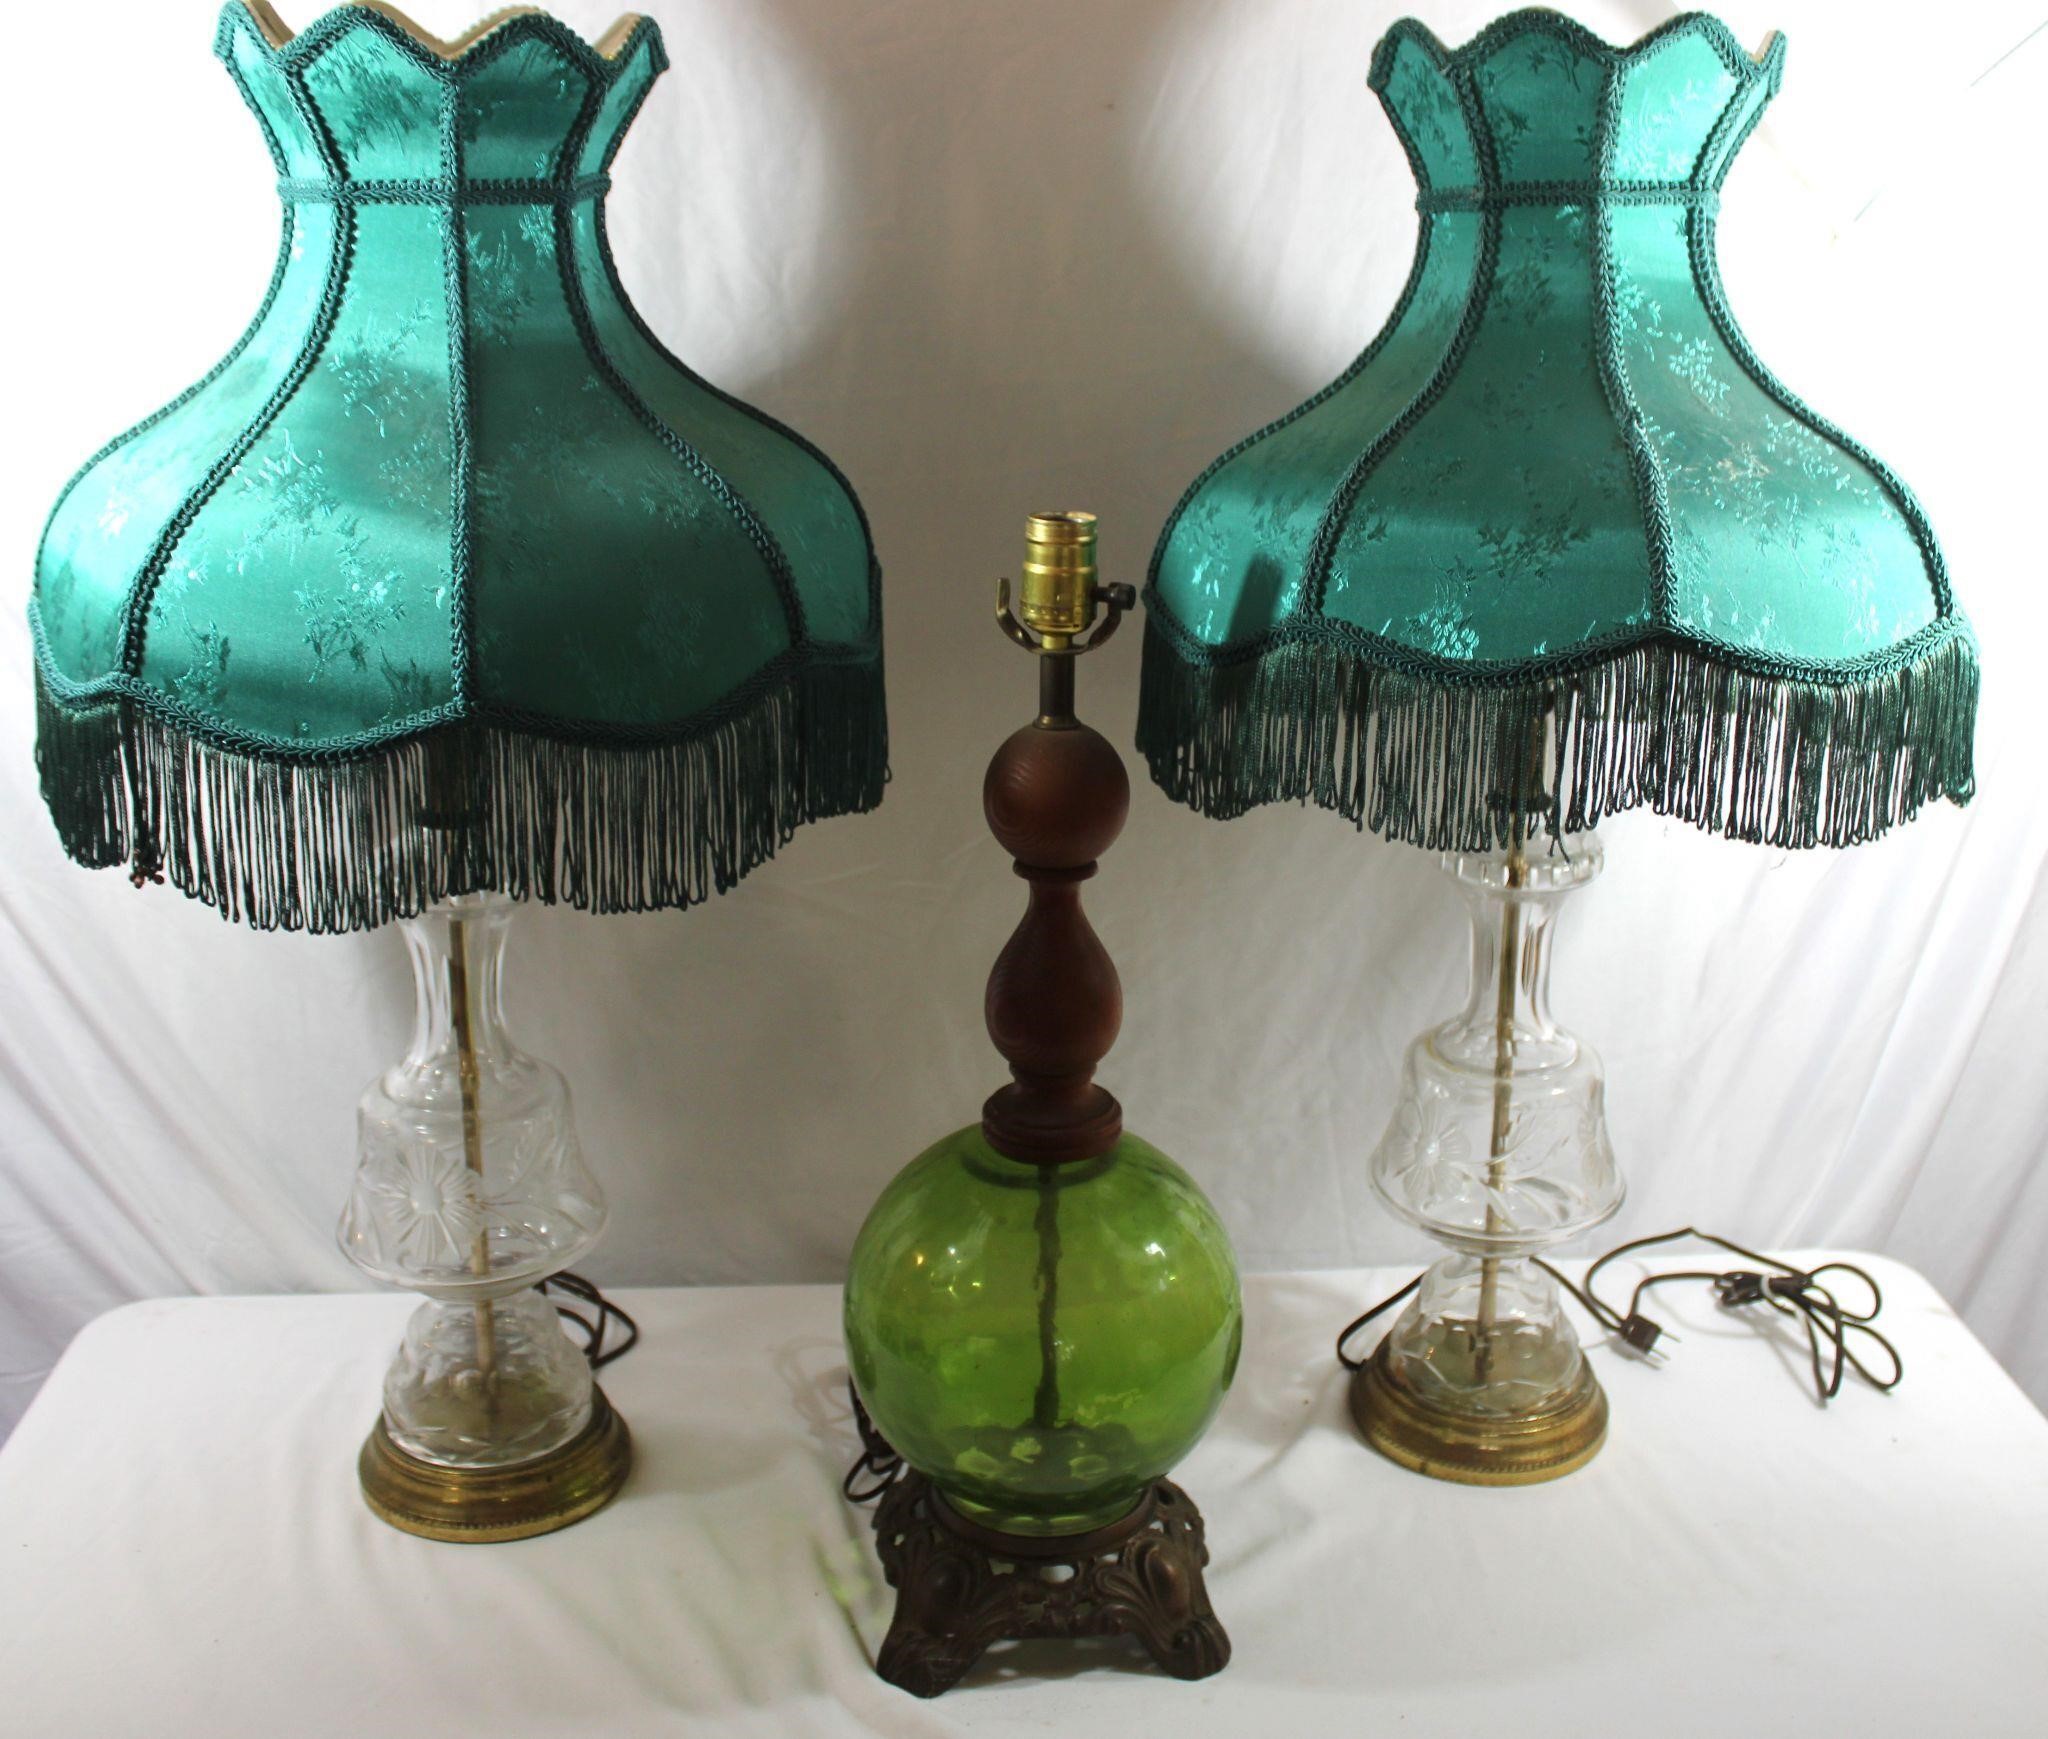 Pr. "Downton Abbey" Fringed Emerald Shade Lamps+